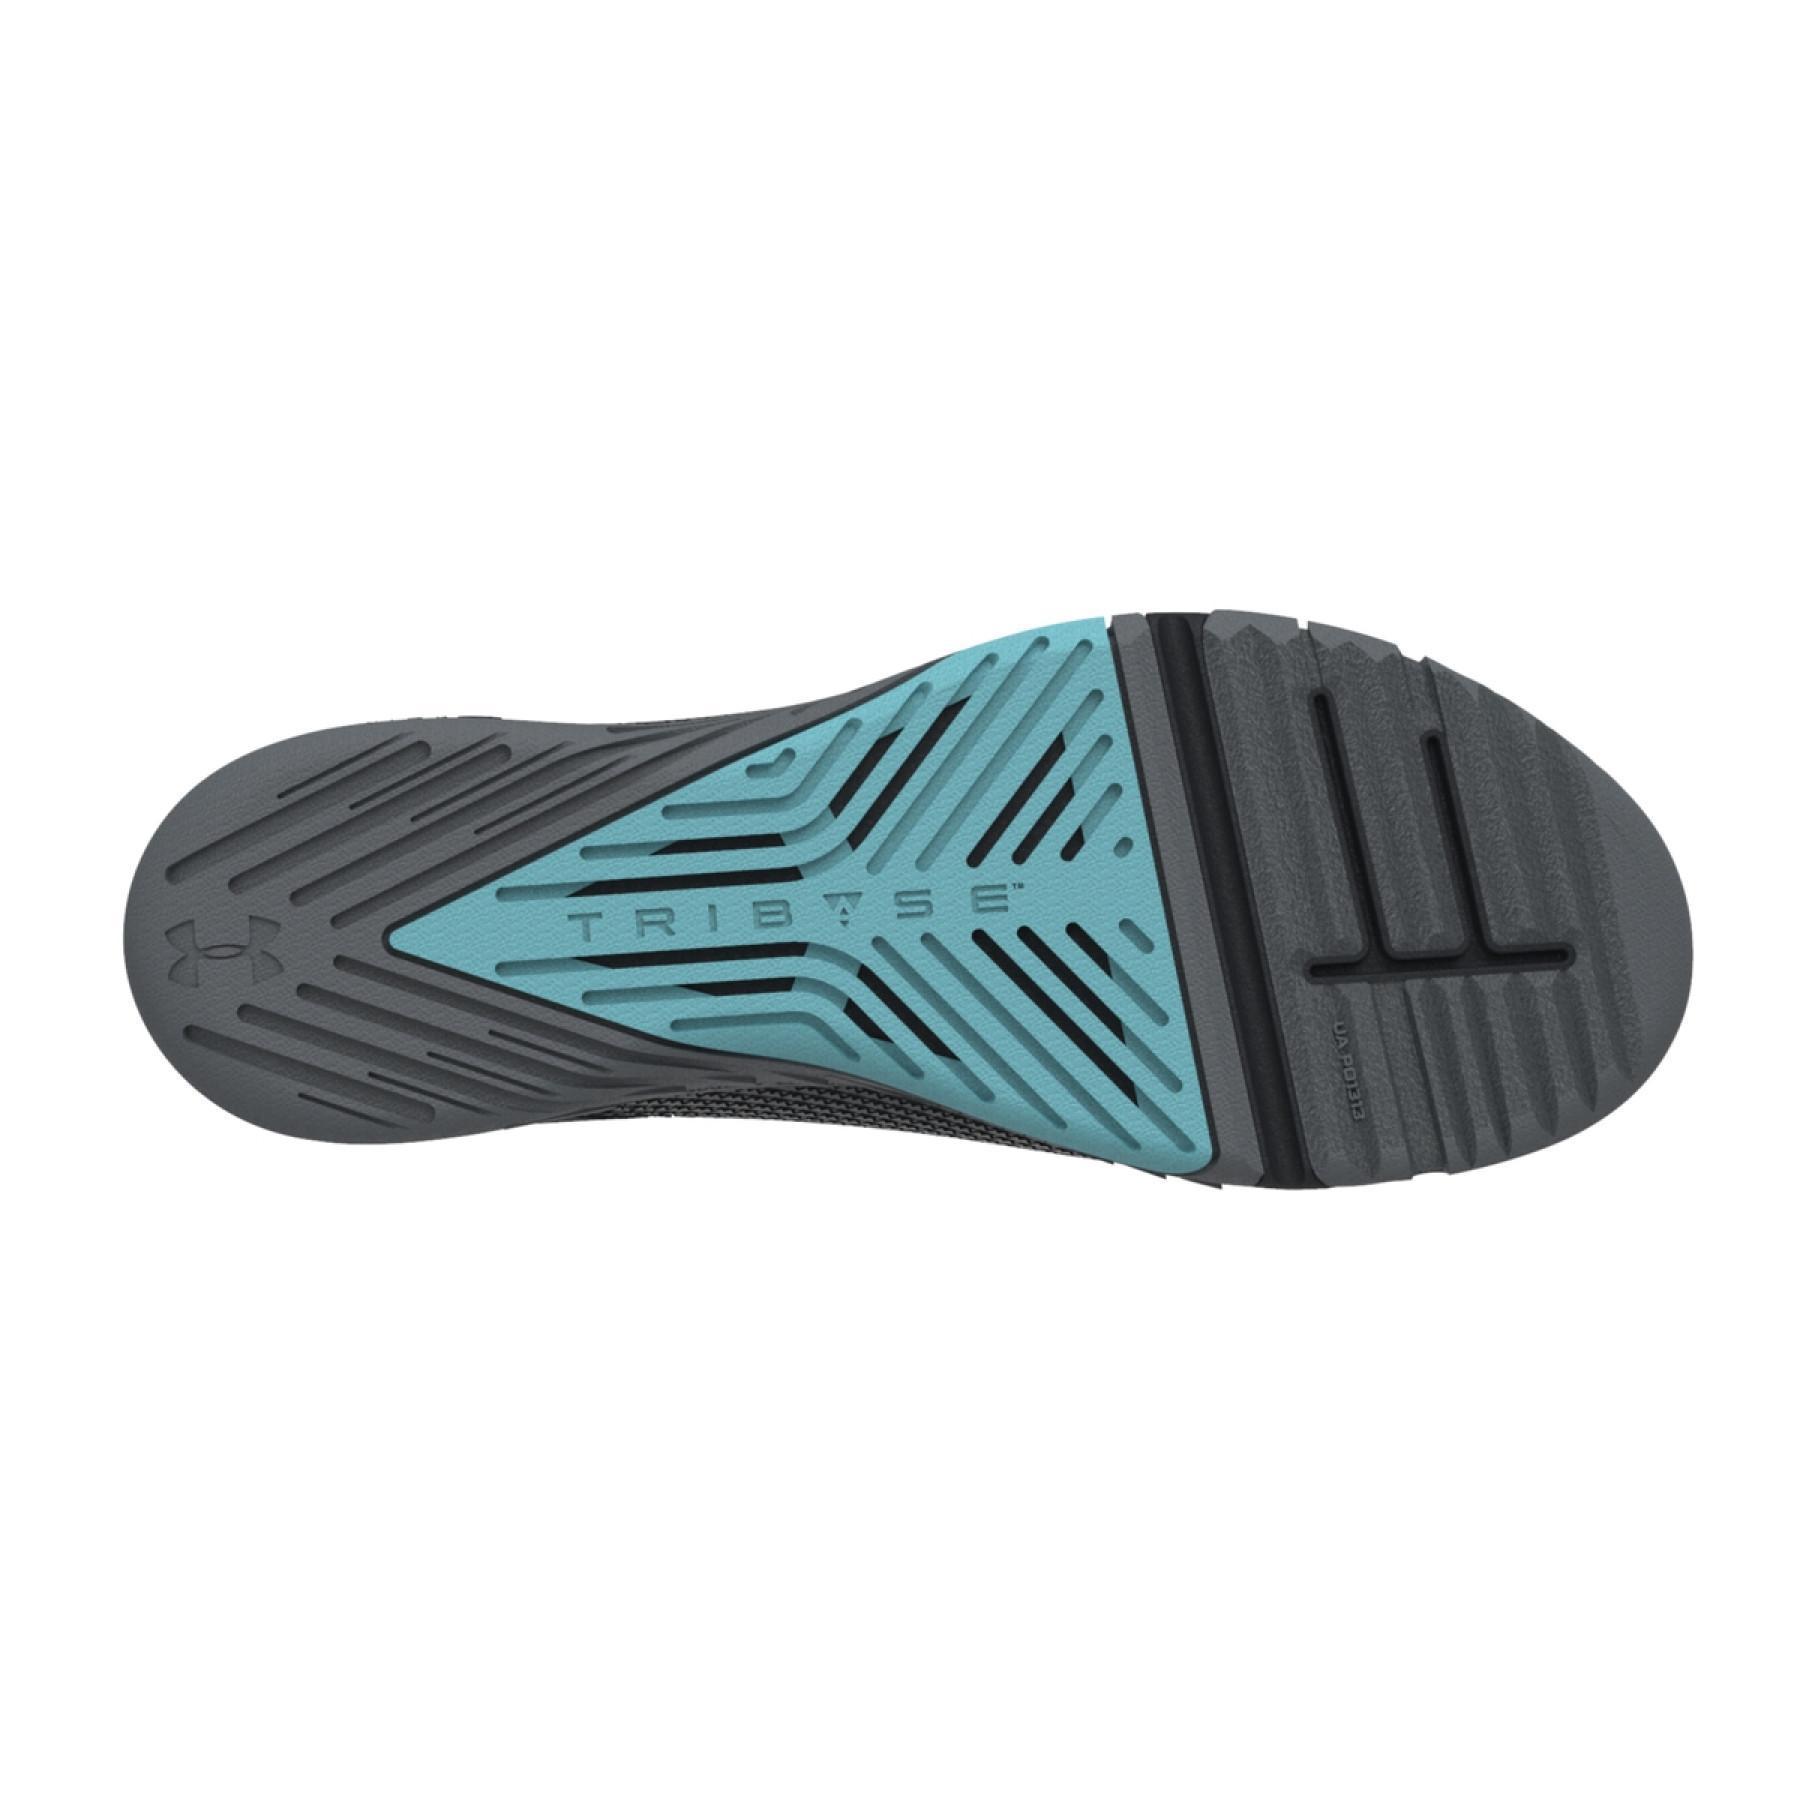 Buty treningowe Under Armour TriBase Reign 3